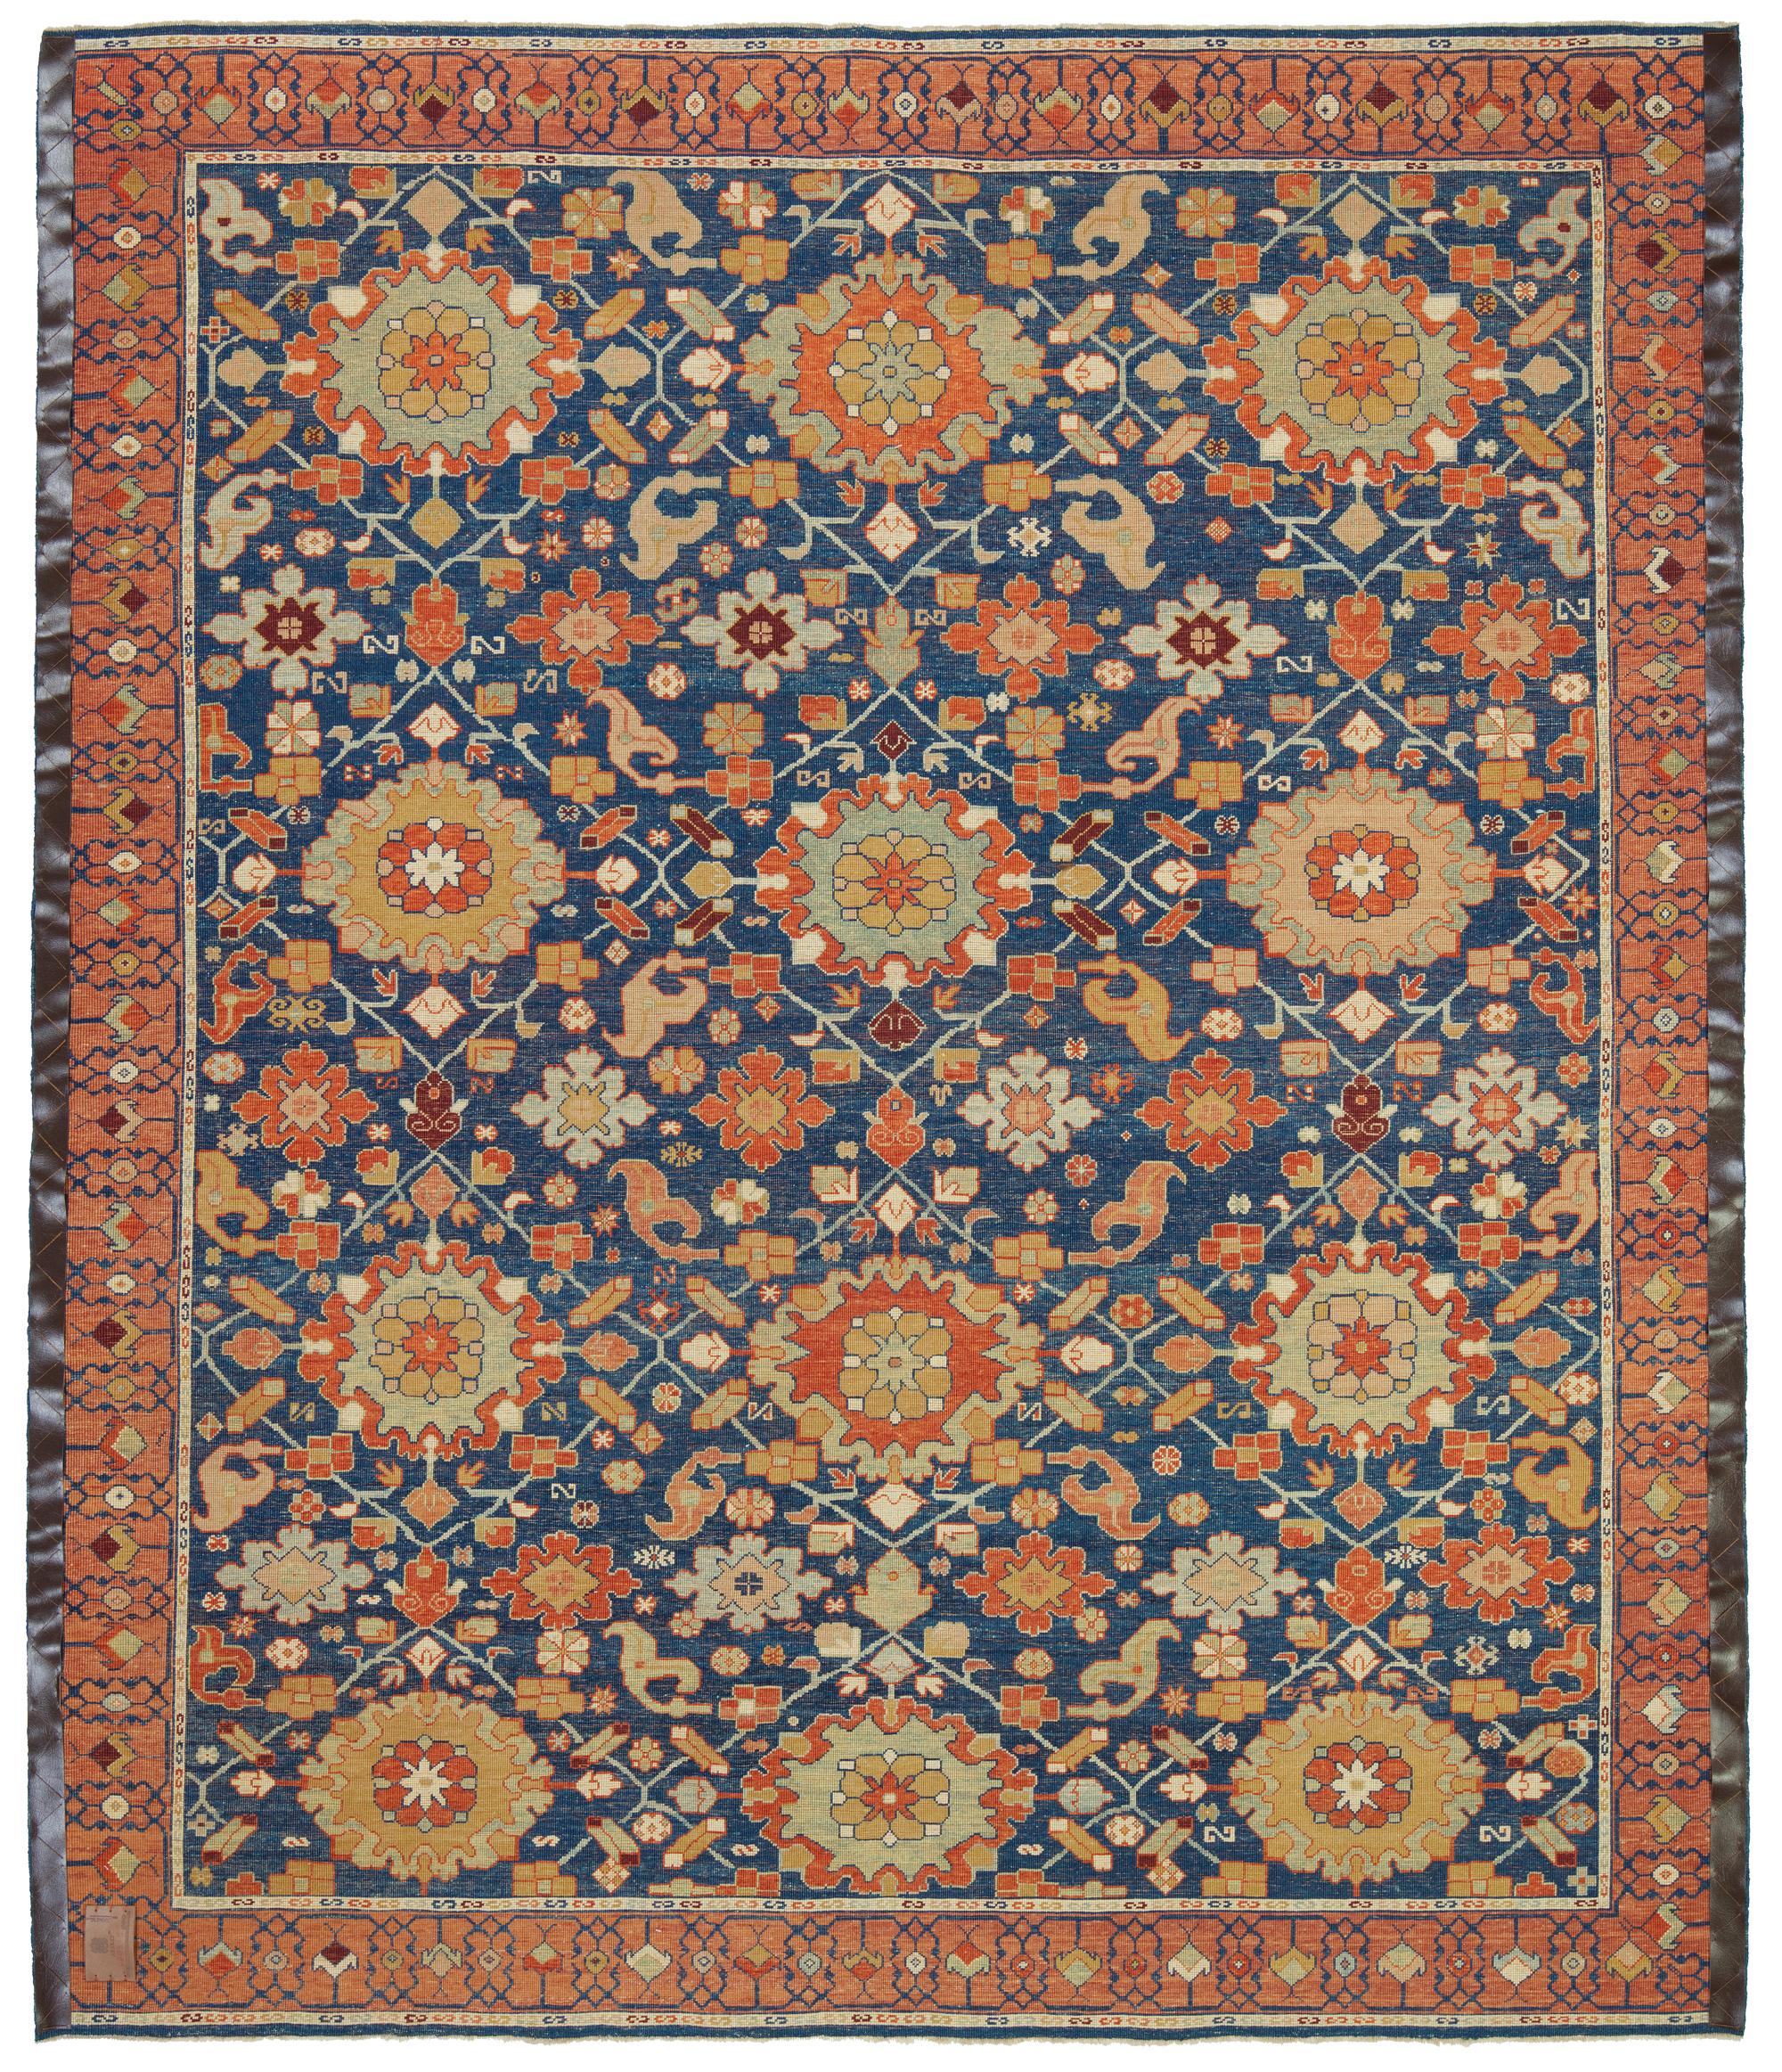 This offset pattern is composed of palmettes and flowers, one has the impression that it is only part of a larger scheme designed 19th-century rug from the Bidjar region, Eastern Kurdistan area. Very similar palmettes, drawn in a curvilinear manner